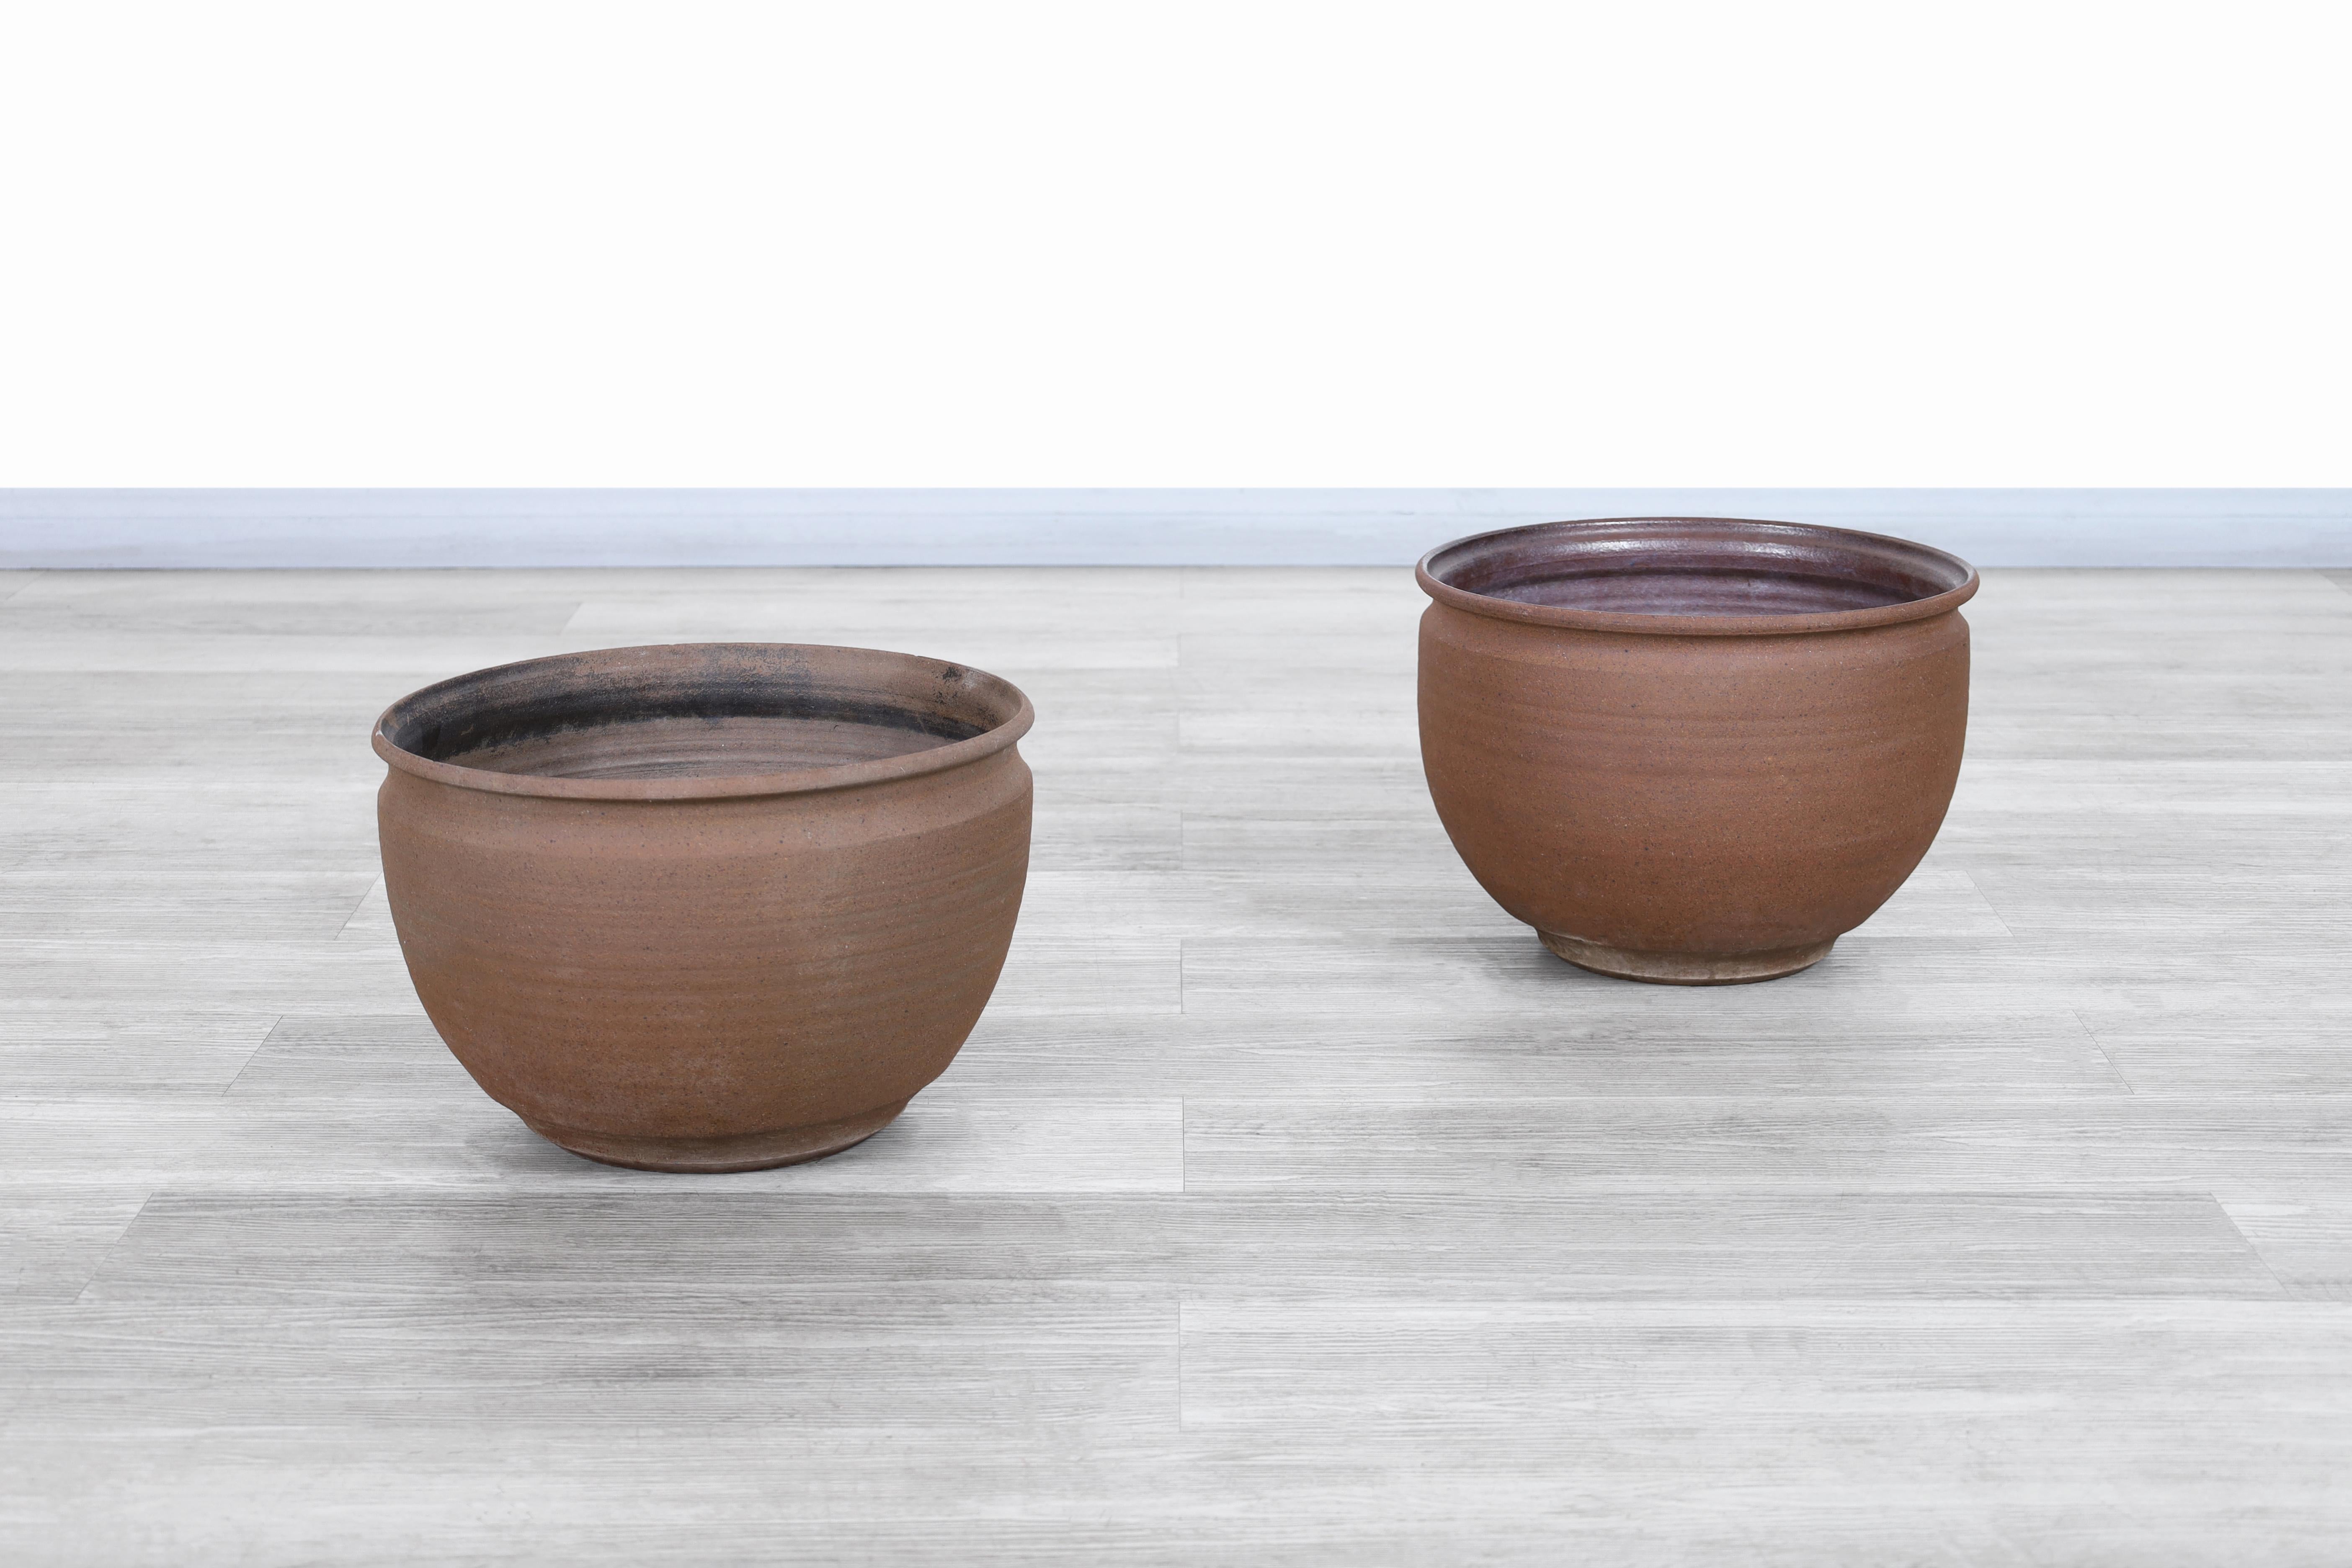 Wonderful vintage planter designed by David Cressey & Robert Maxwell for Earthgender in the United States, circa 1970s. This planter has a conventional design, highlighting the craftsmanship reflected through its sculpted lines that can be seen